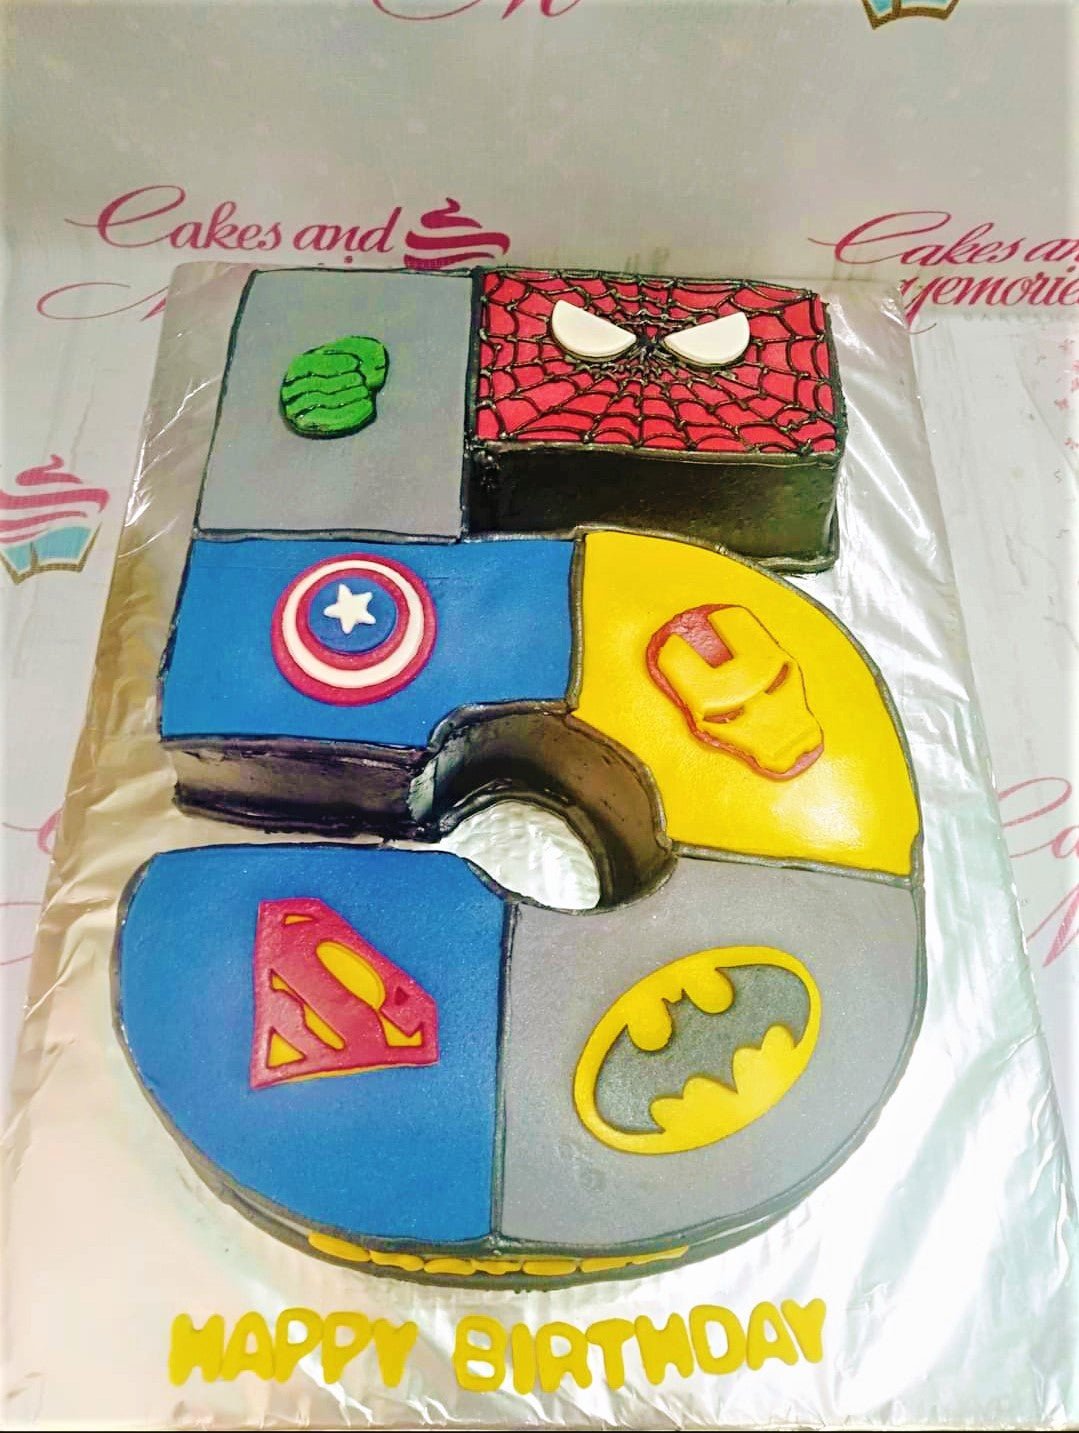 Details more than 55 avengers birthday cake - in.daotaonec